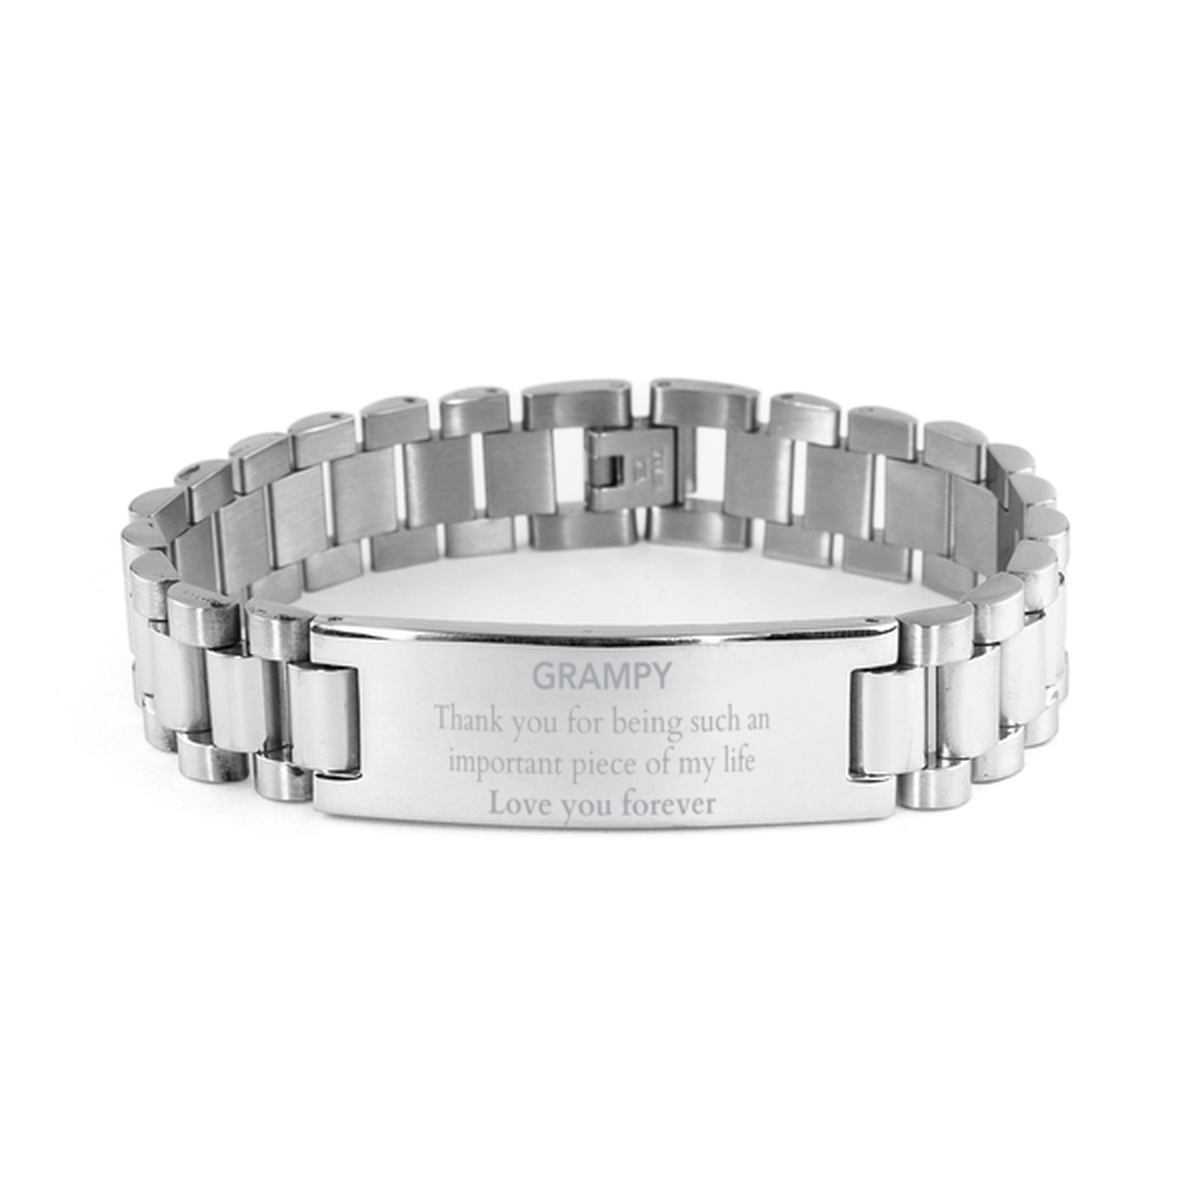 Appropriate Grampy Ladder Stainless Steel Bracelet Epic Birthday Gifts for Grampy Thank you for being such an important piece of my life Grampy Christmas Mothers Fathers Day